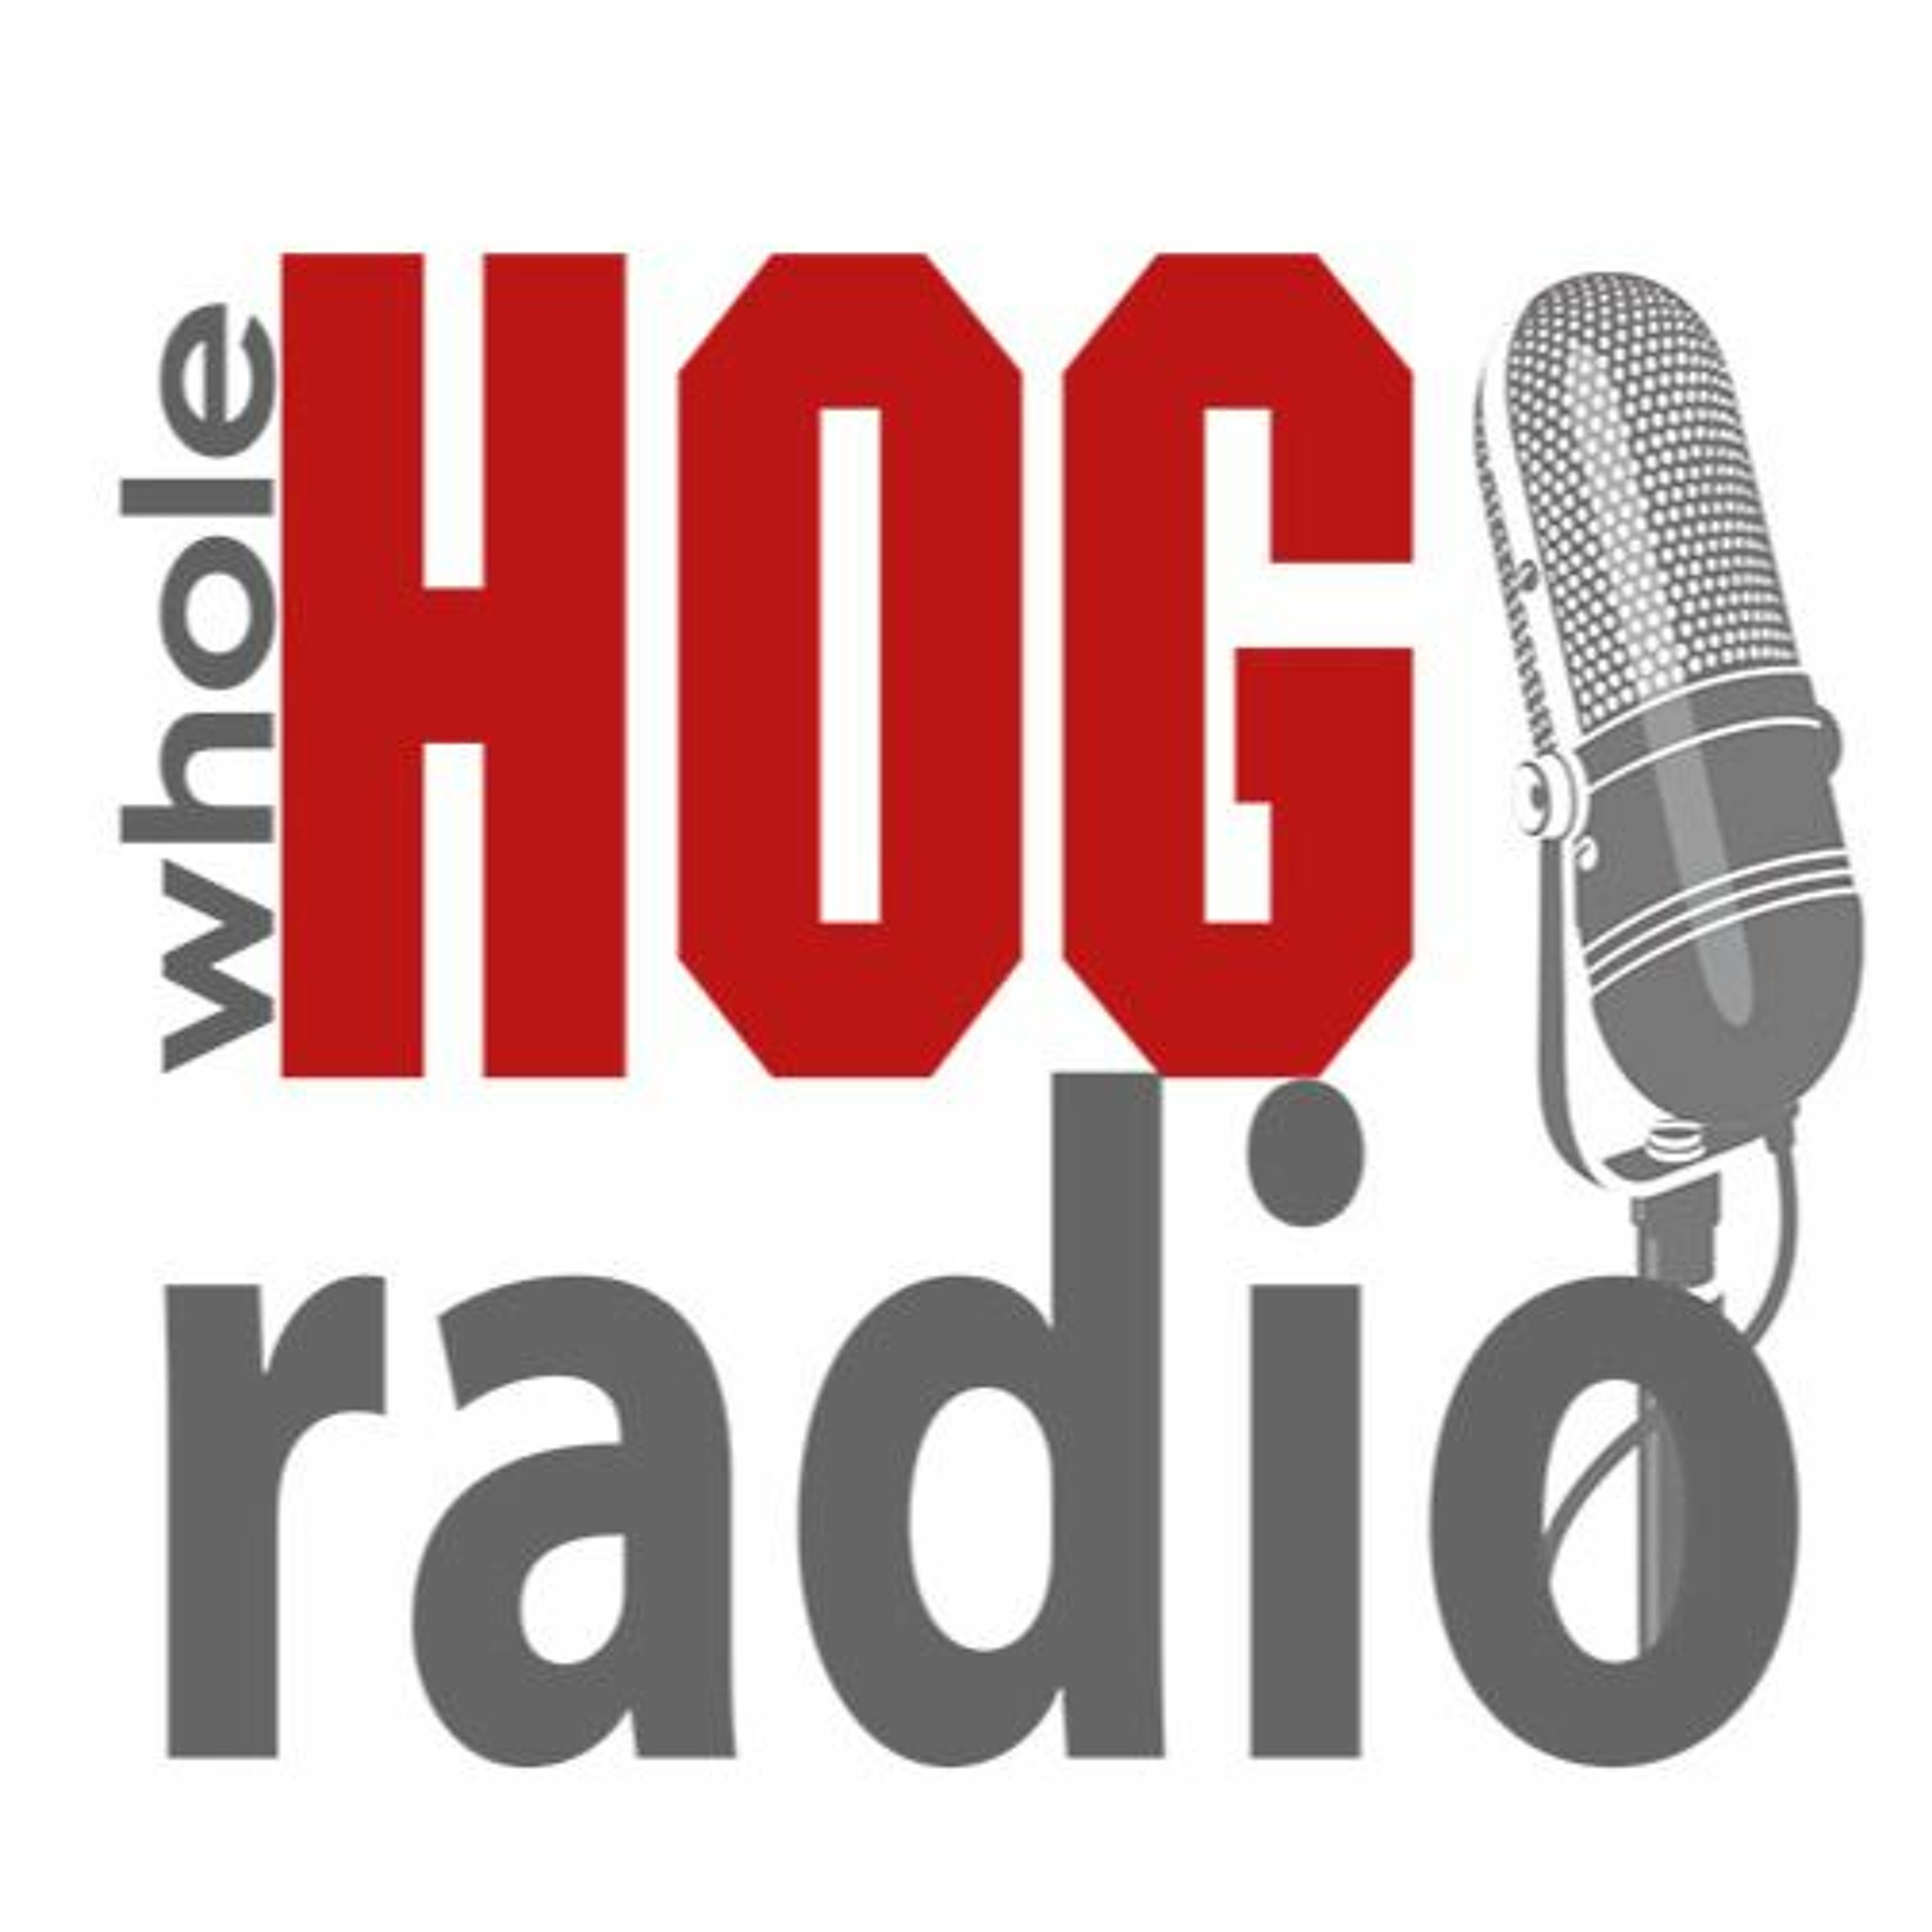 WholeHog Podcast: Auburn preview, Buy or Sell